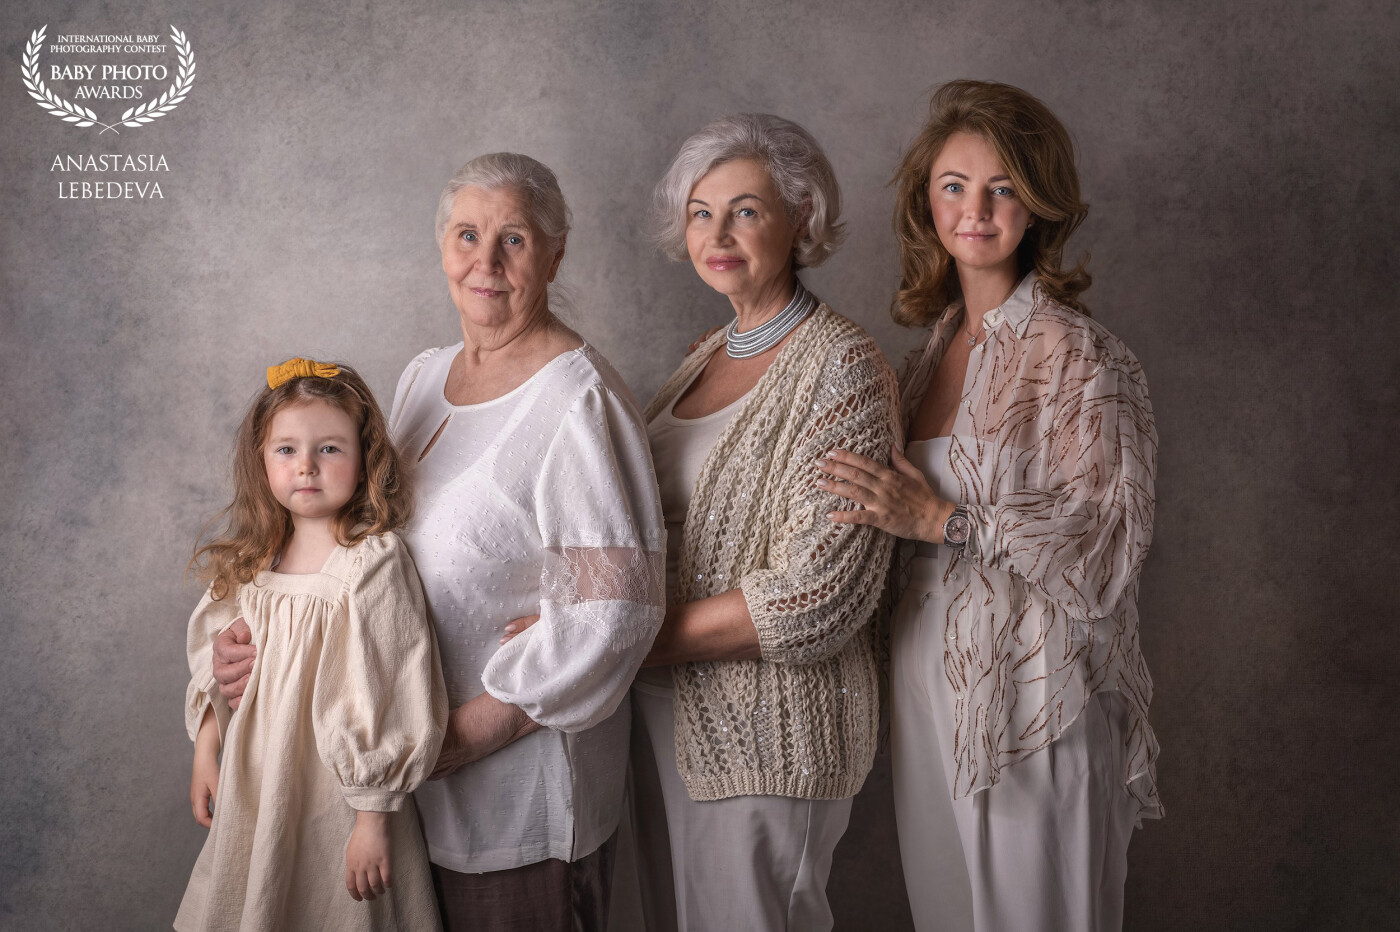 There is a whole dynasty of girls in this photo.... Great-grandmother, grandmother, mother and granddaughter. This is priceless and should become a good tradition to repeat this year after year!